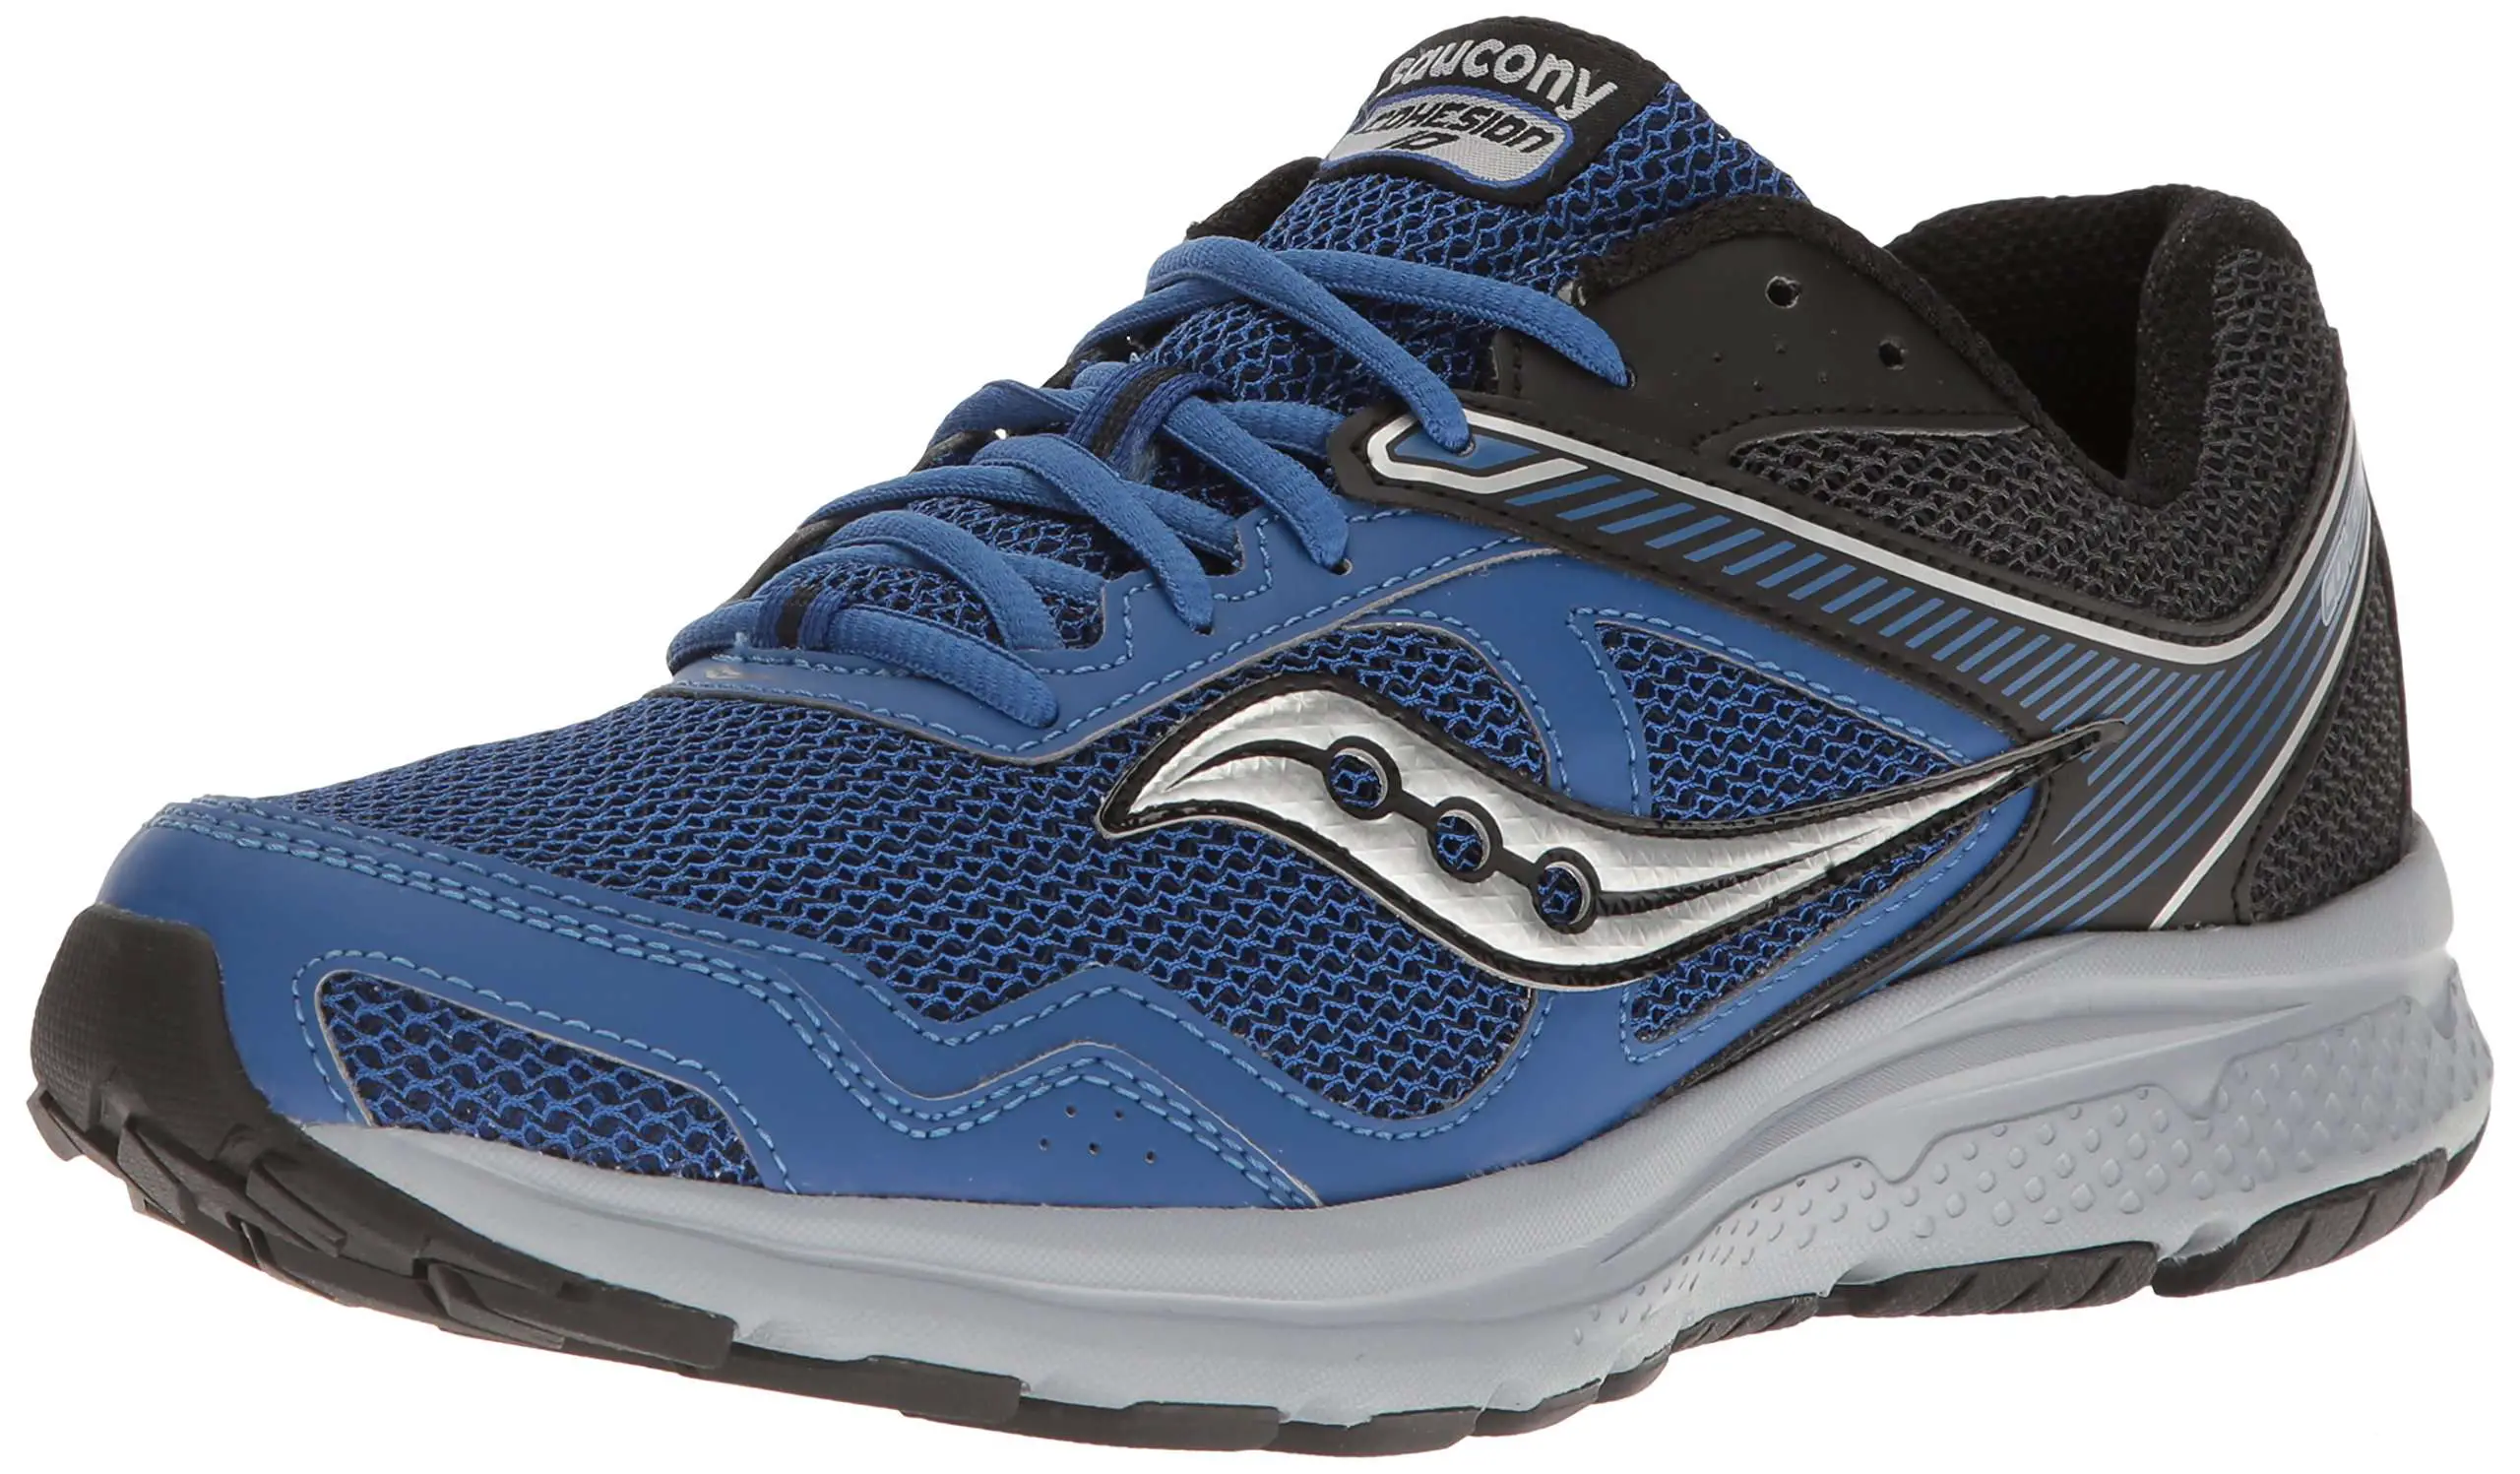 9 Best Running Shoes For Bad Knees 2019 Reviewed